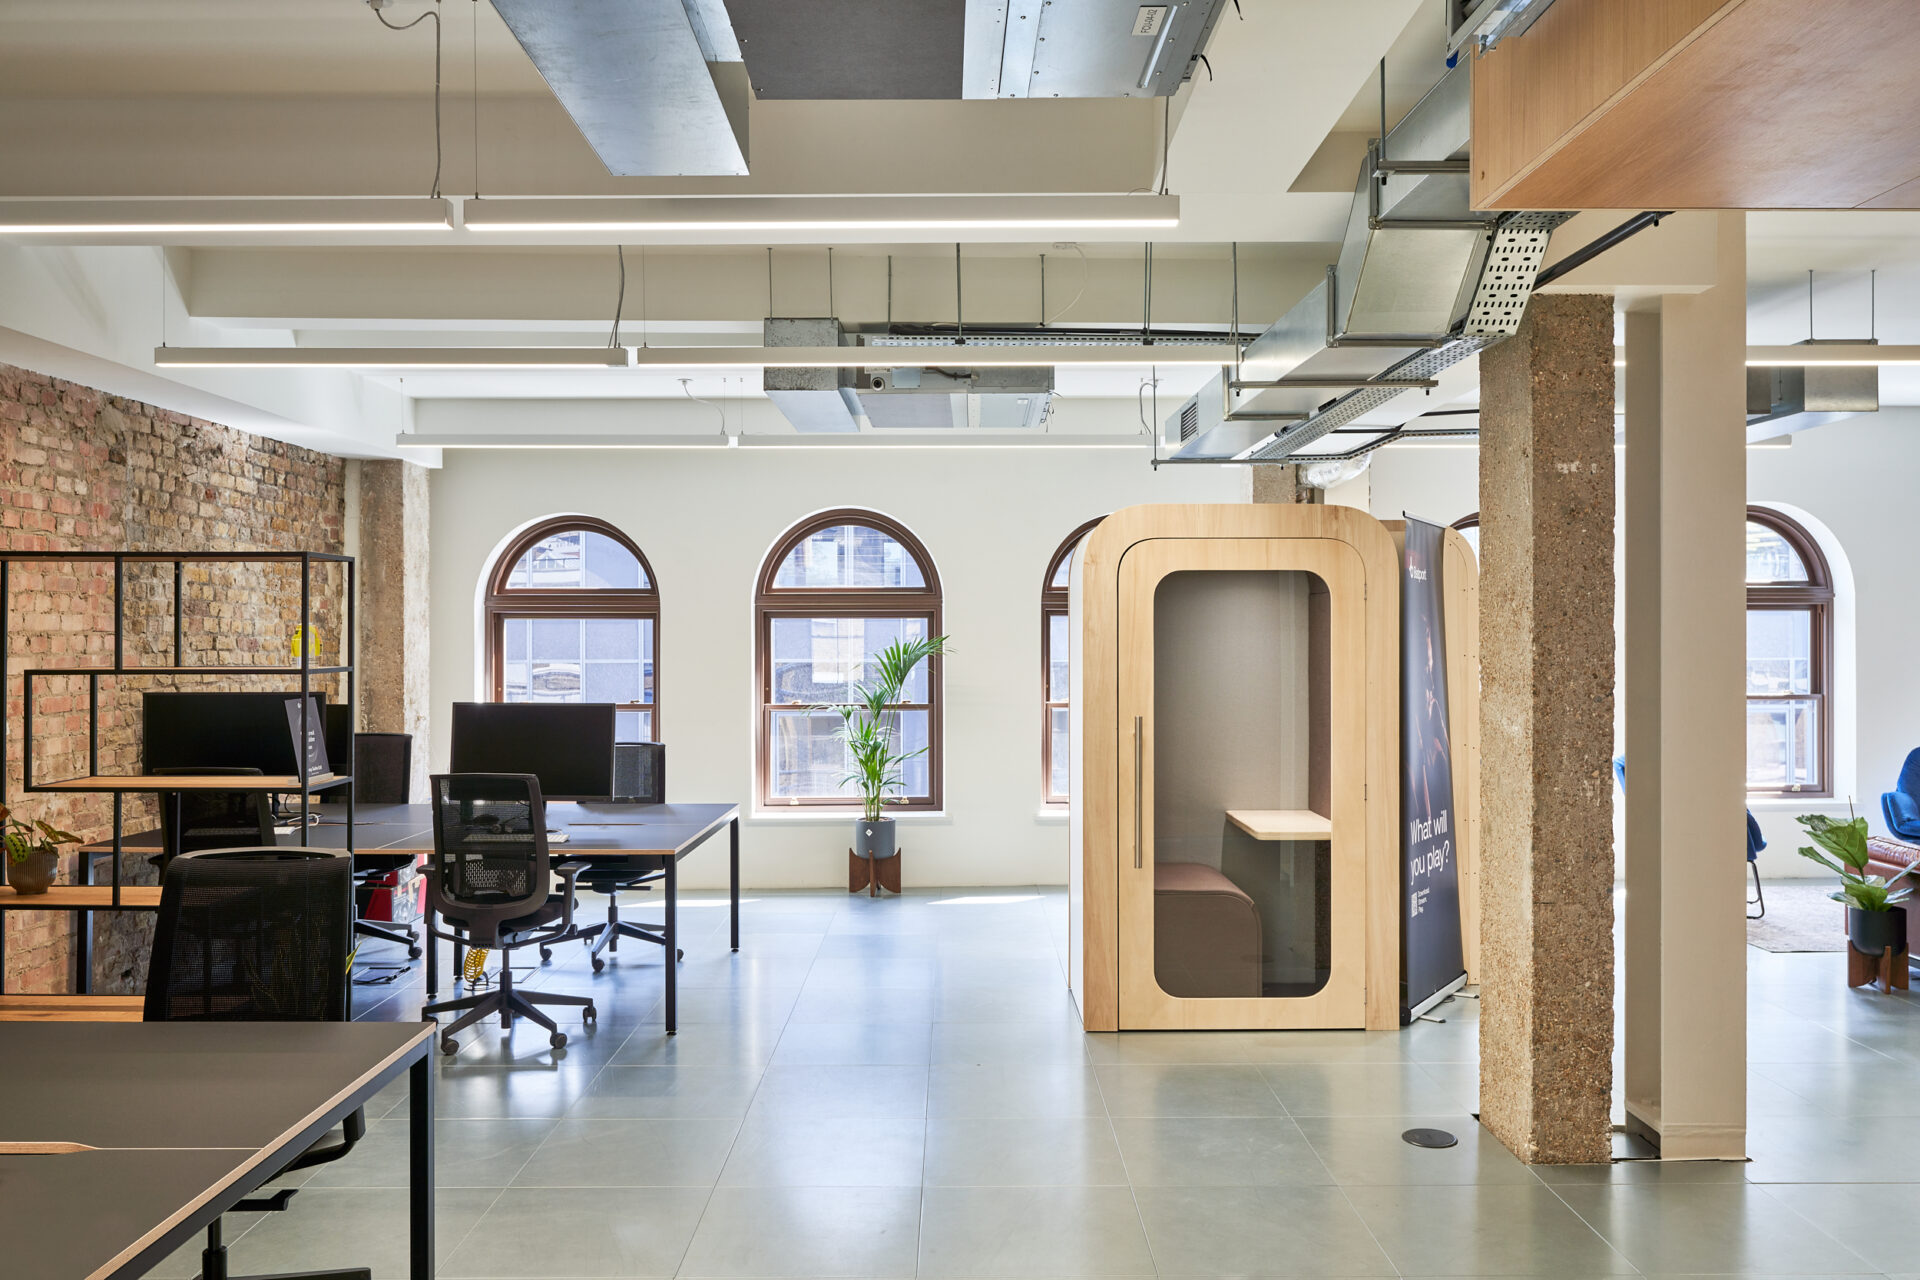 Beatport open office workspace with phone booth